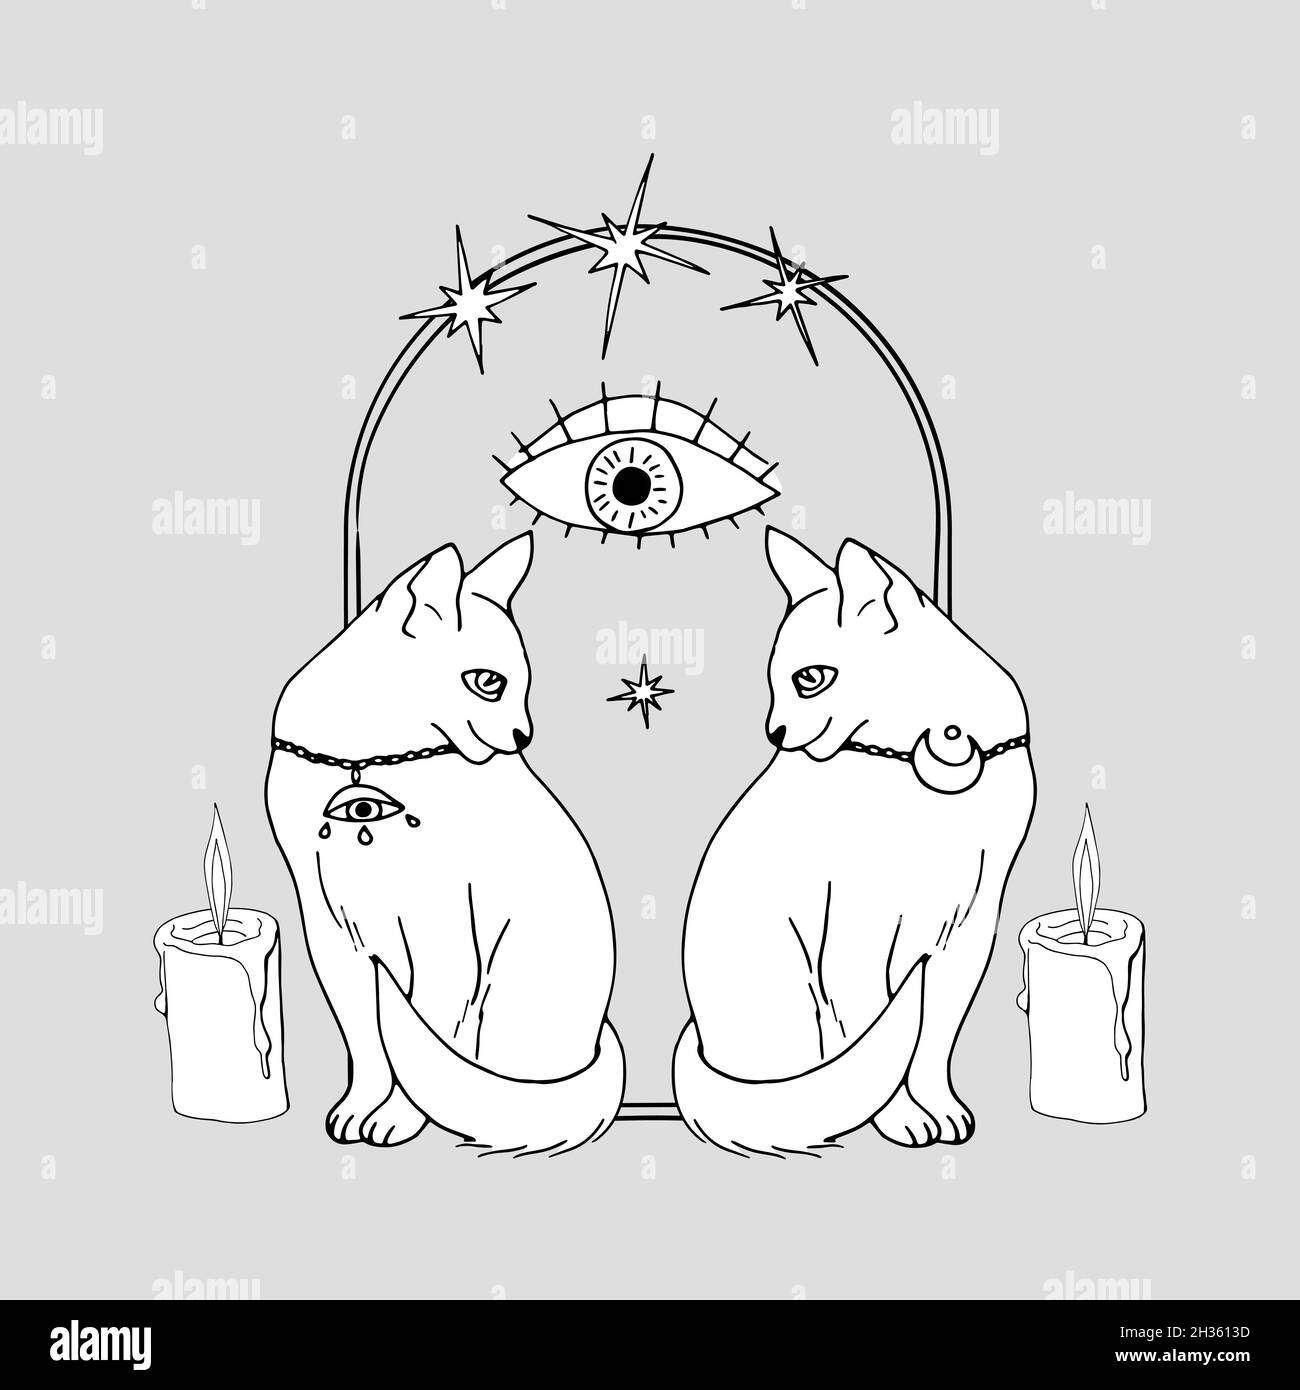 Vintage Mystic Cats and candles inside arch decorated with stars and all seeing eye drawing Stock Vector